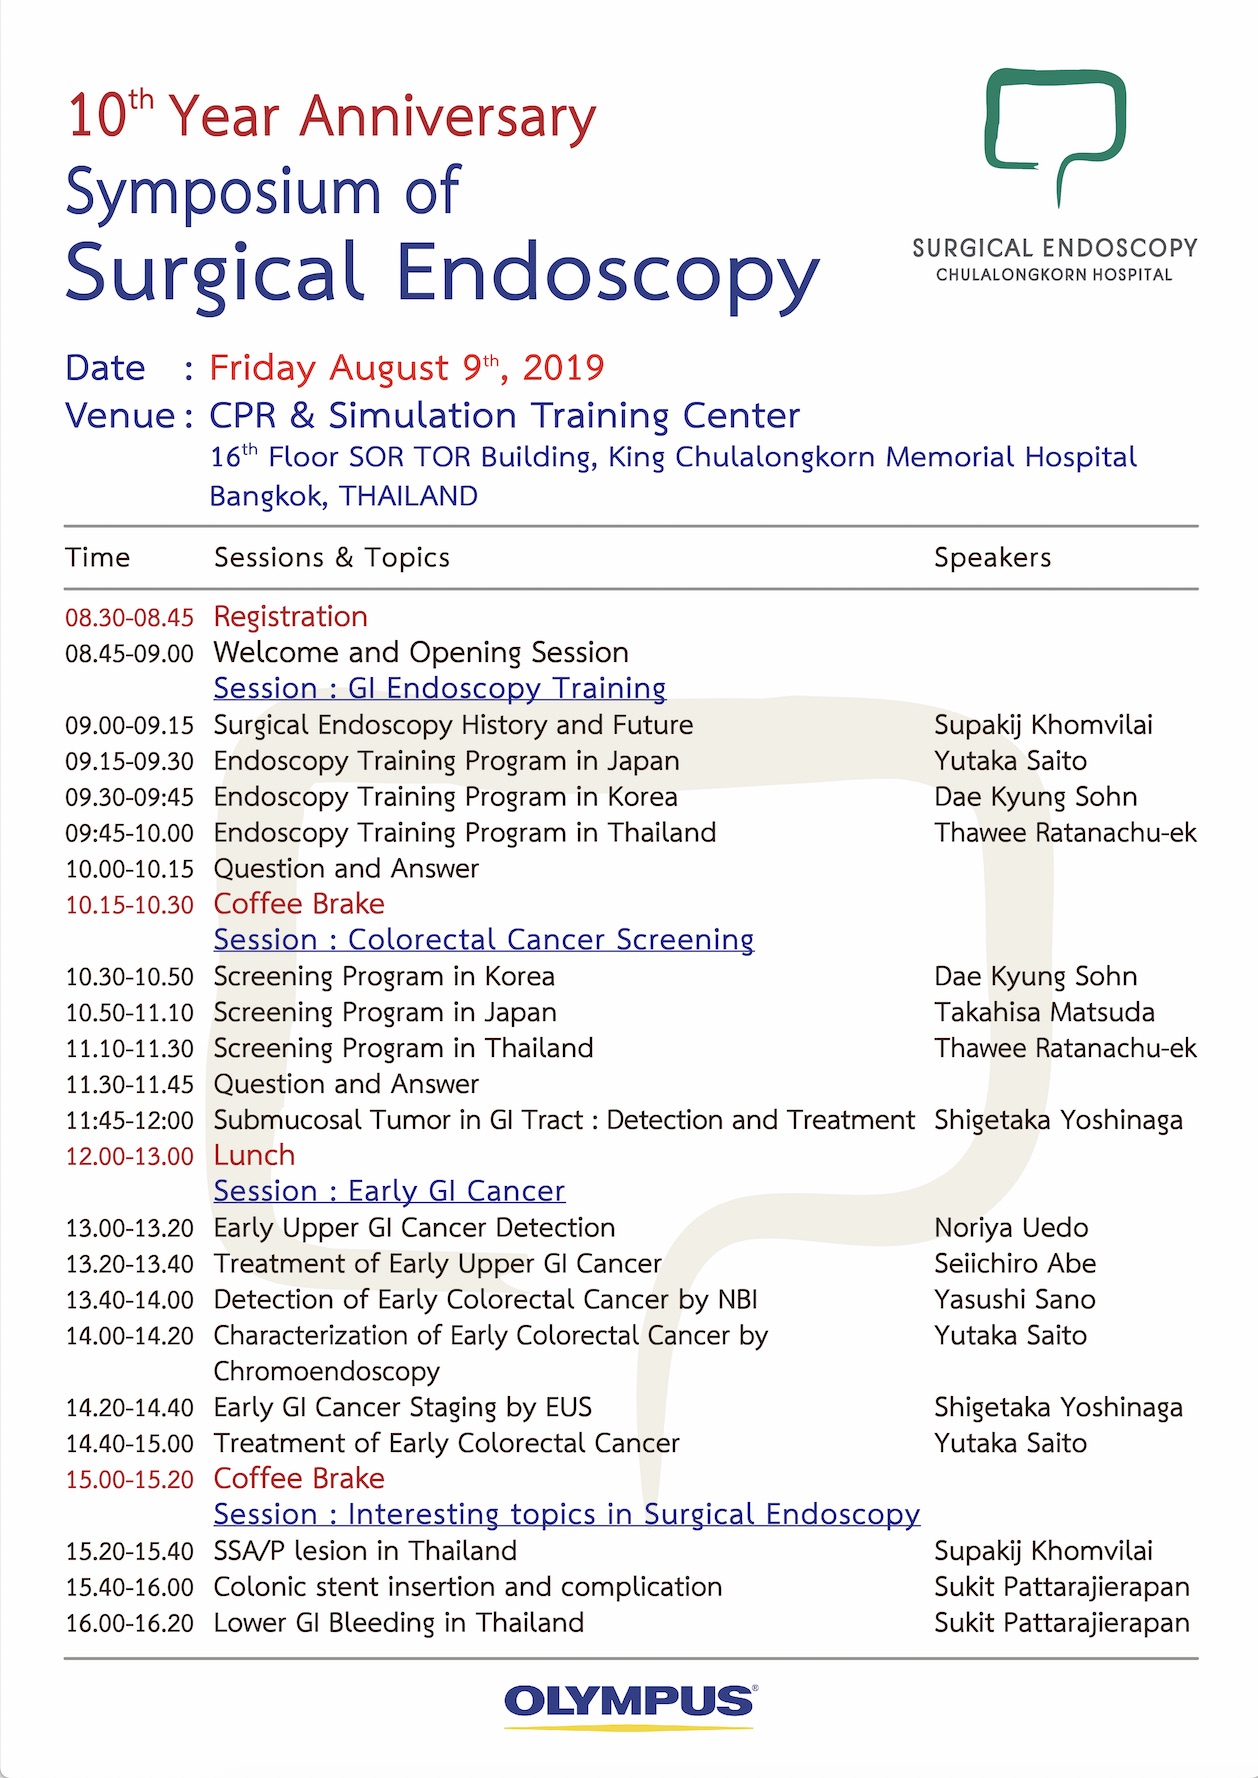 10th Year Anniversary: Symposium of Surgical Endoscopy